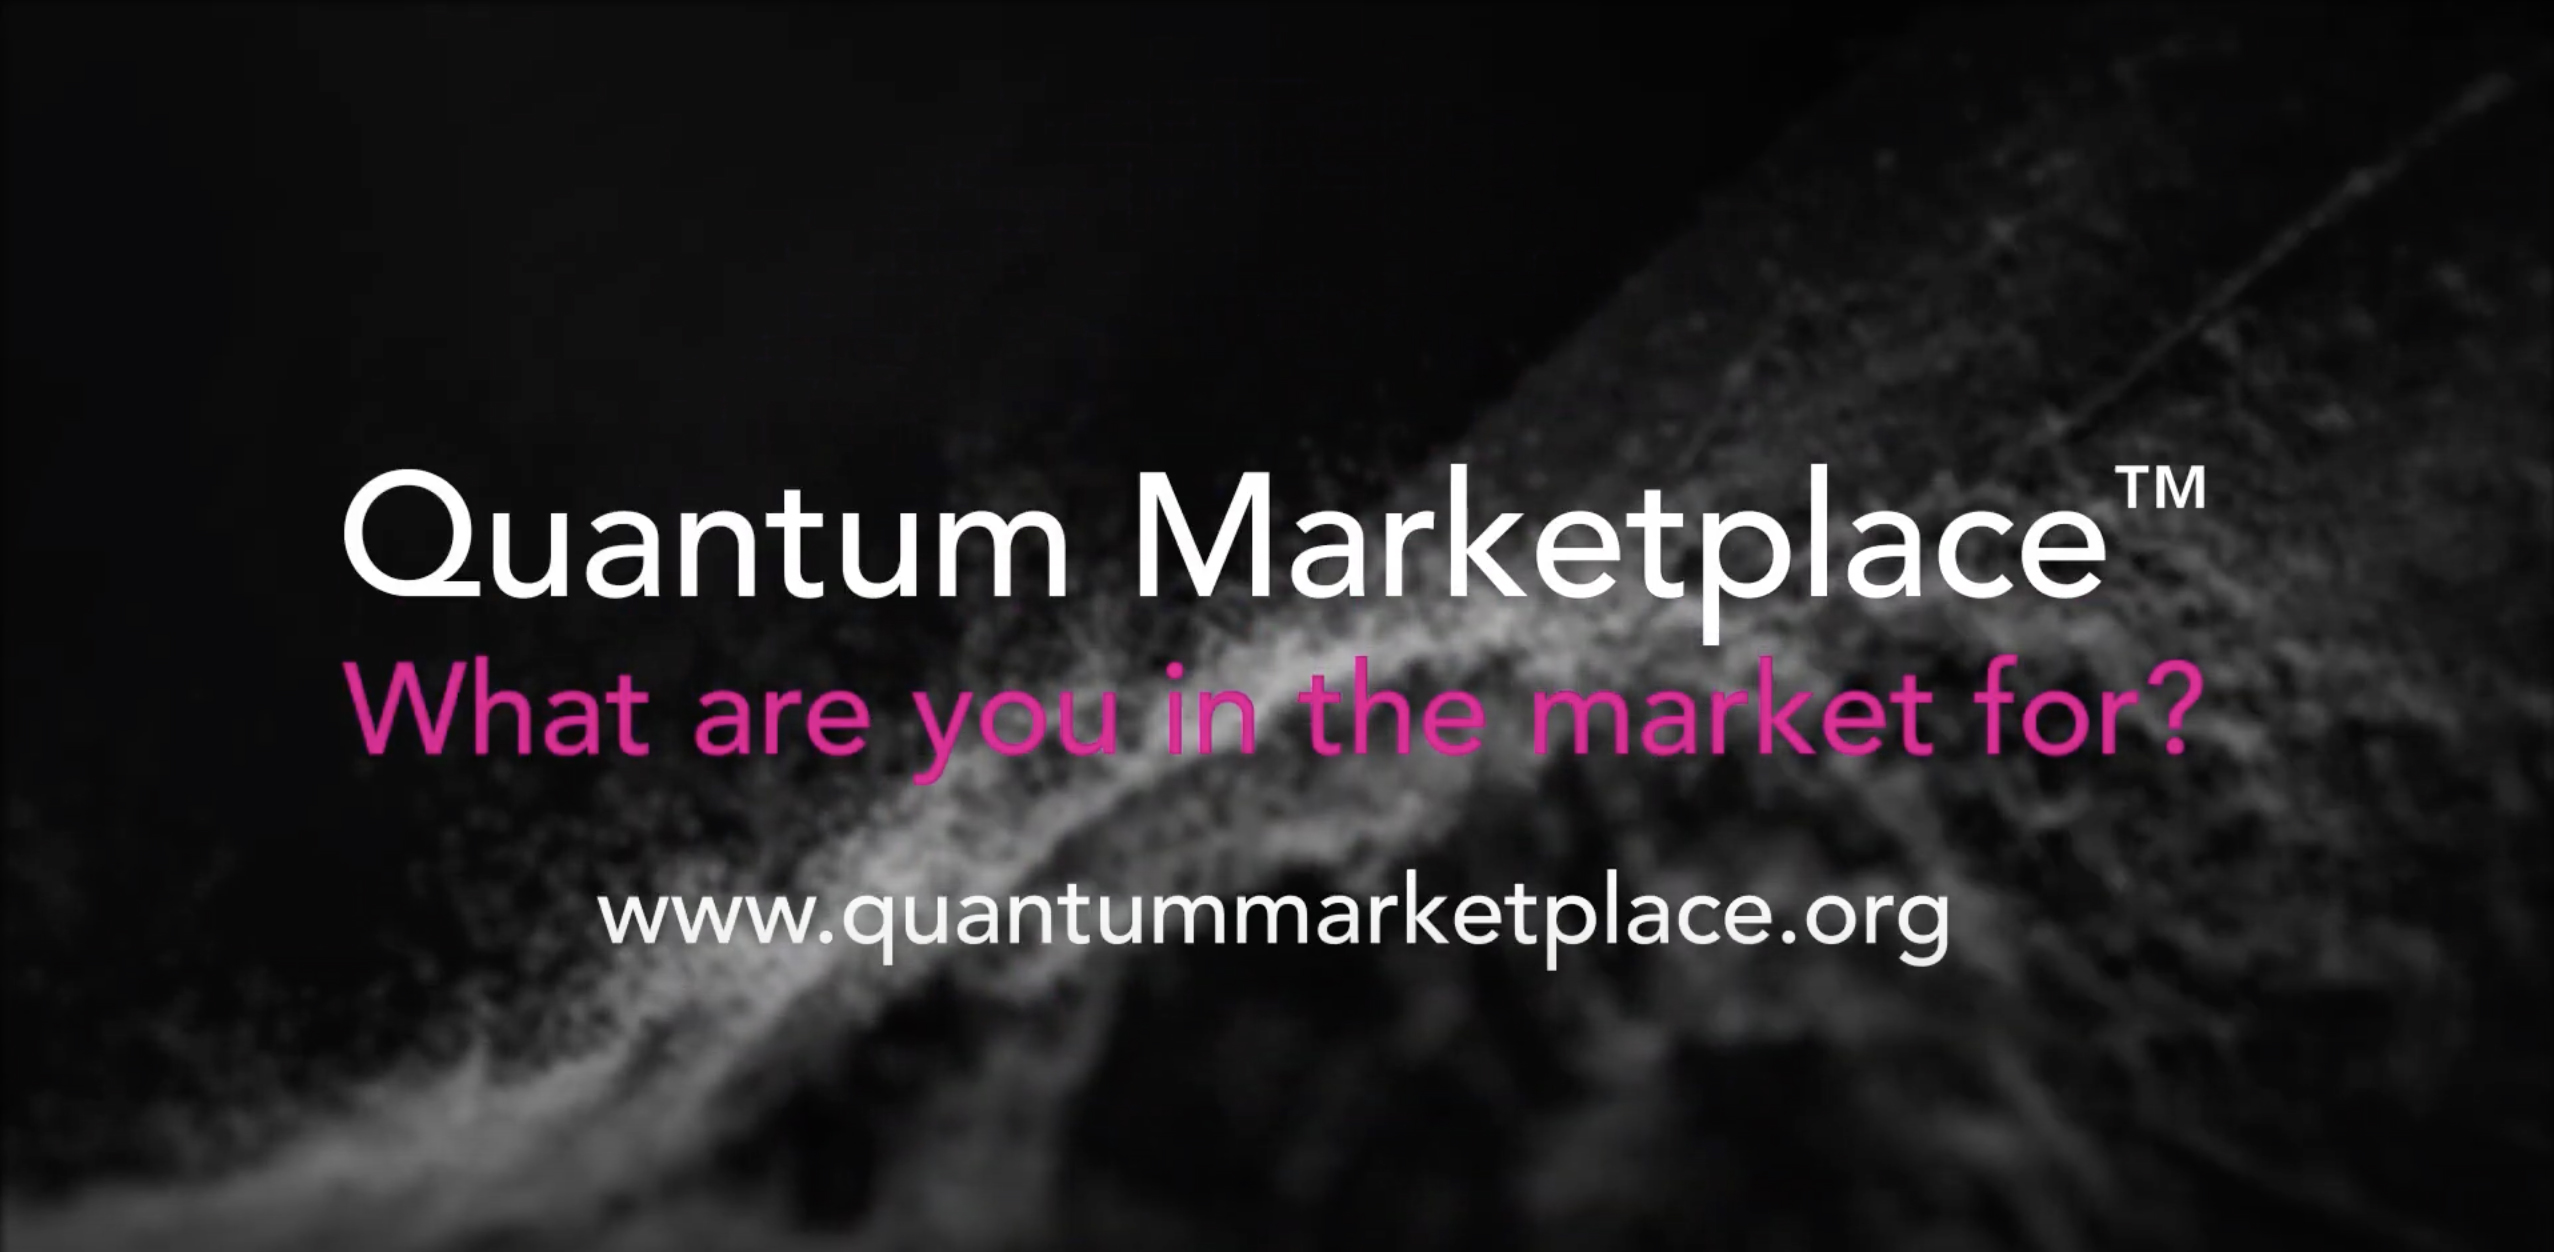 Young Basile Patent Agent, Elliot Mason Featured Speaker in Webinar Hosted By The Quantum Marketplace